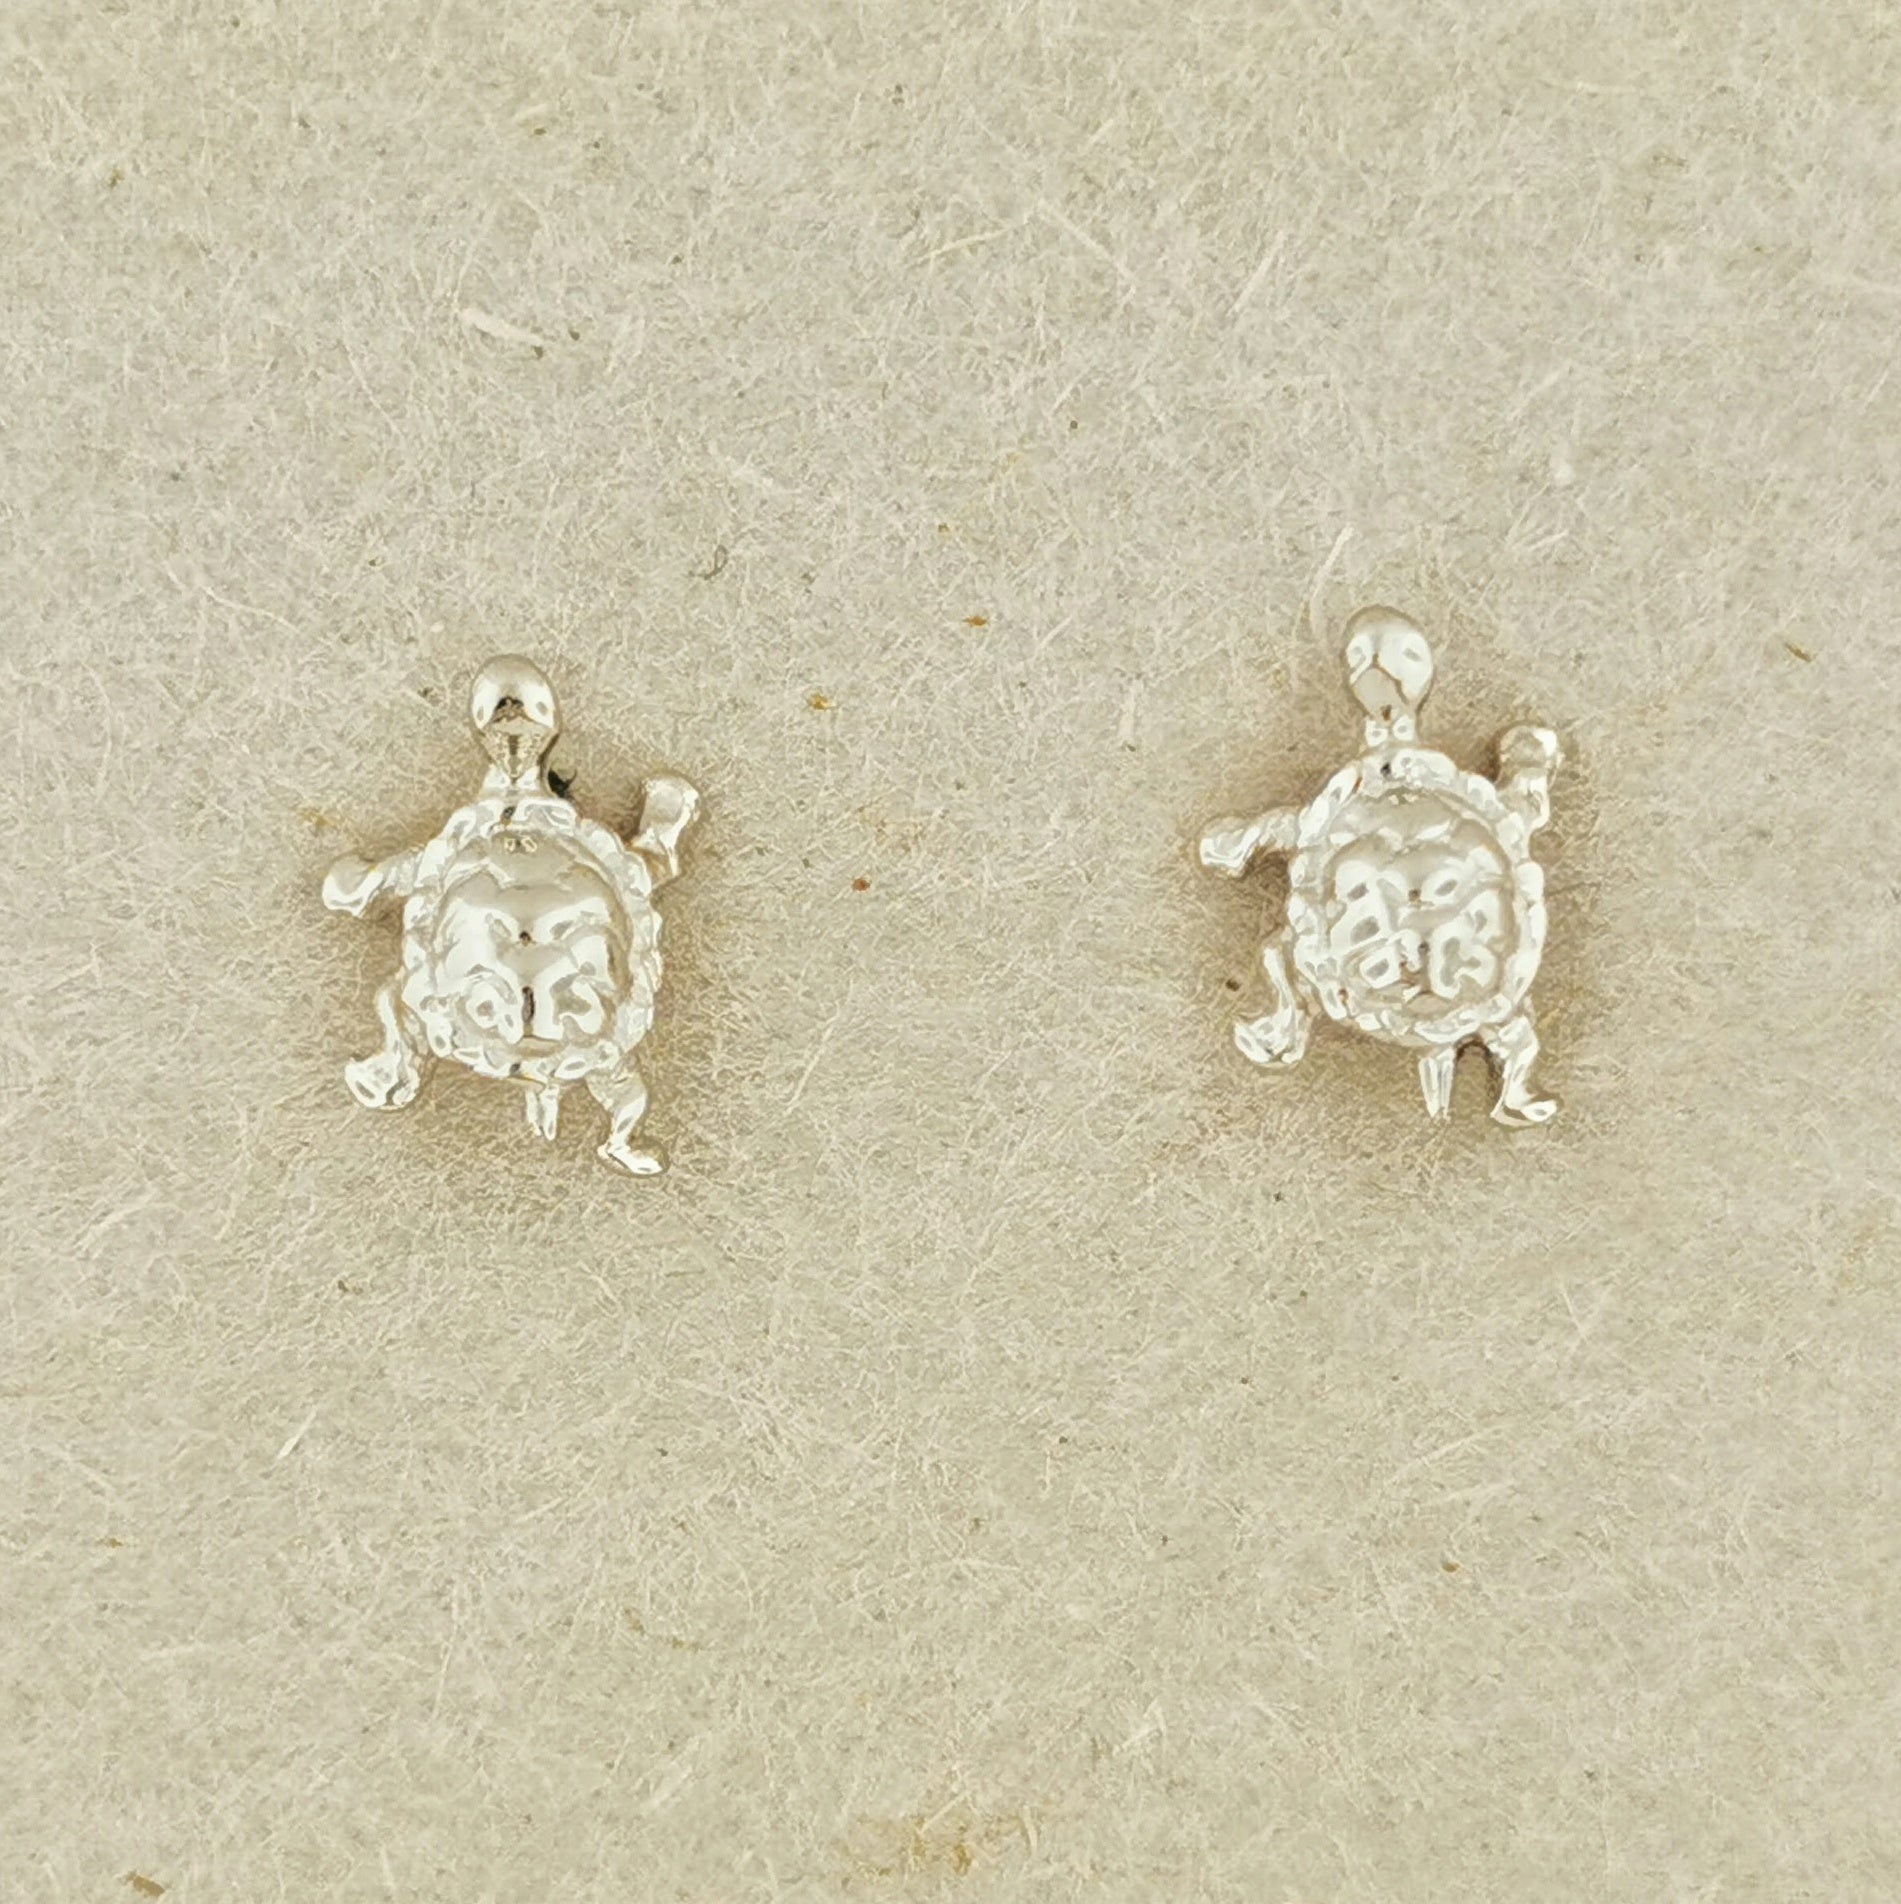 Gold Turtle Earrings Made To Order, Gold Turtle Earrings, Gold Turtle Jewelry, Gold Turtle Jewellery, Turtle Stud Earrings, Small Turtule Earrings in Gold, Turtle Lover Earrings, Turtle Lover Studs, Turtle Lovers Jewelry, Turtle Lover Jewellery